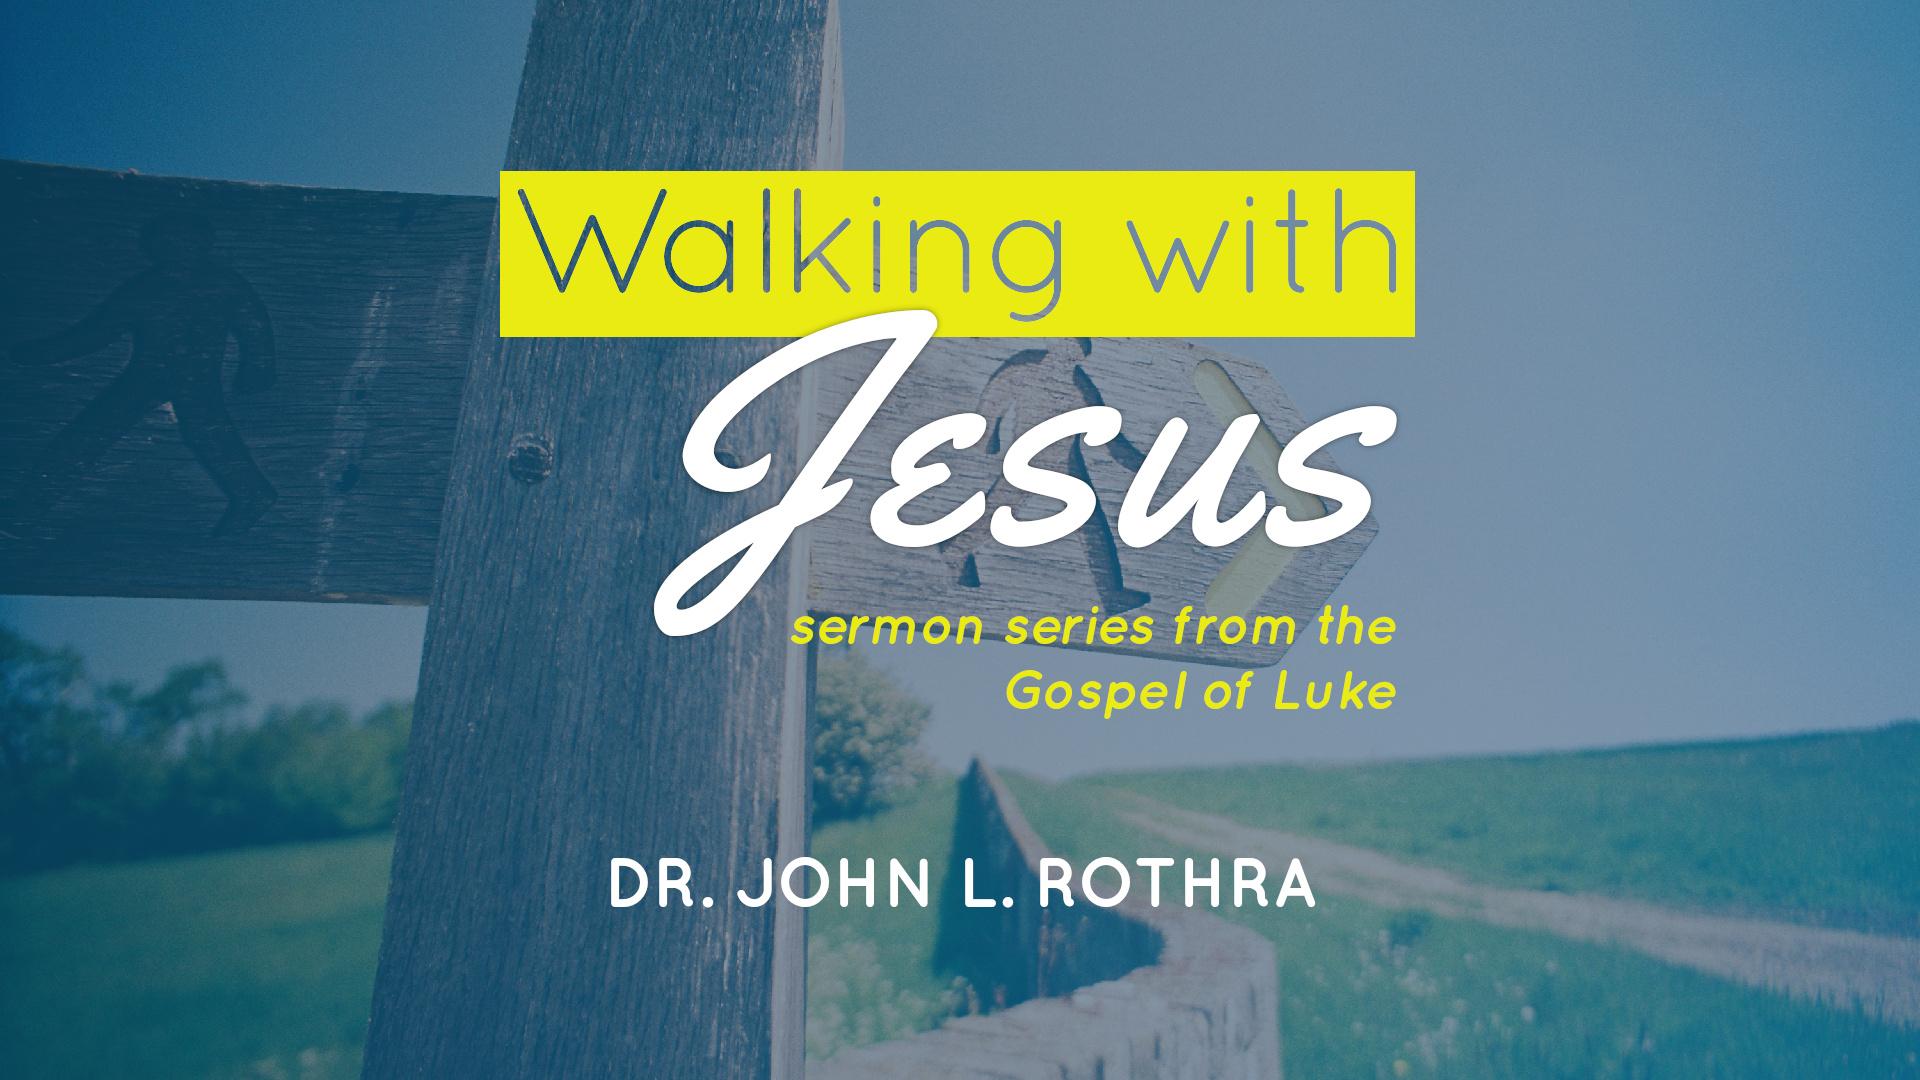 Direction sign - Walking with Jesus sermon series from Luke by Dr. John L. Rothra